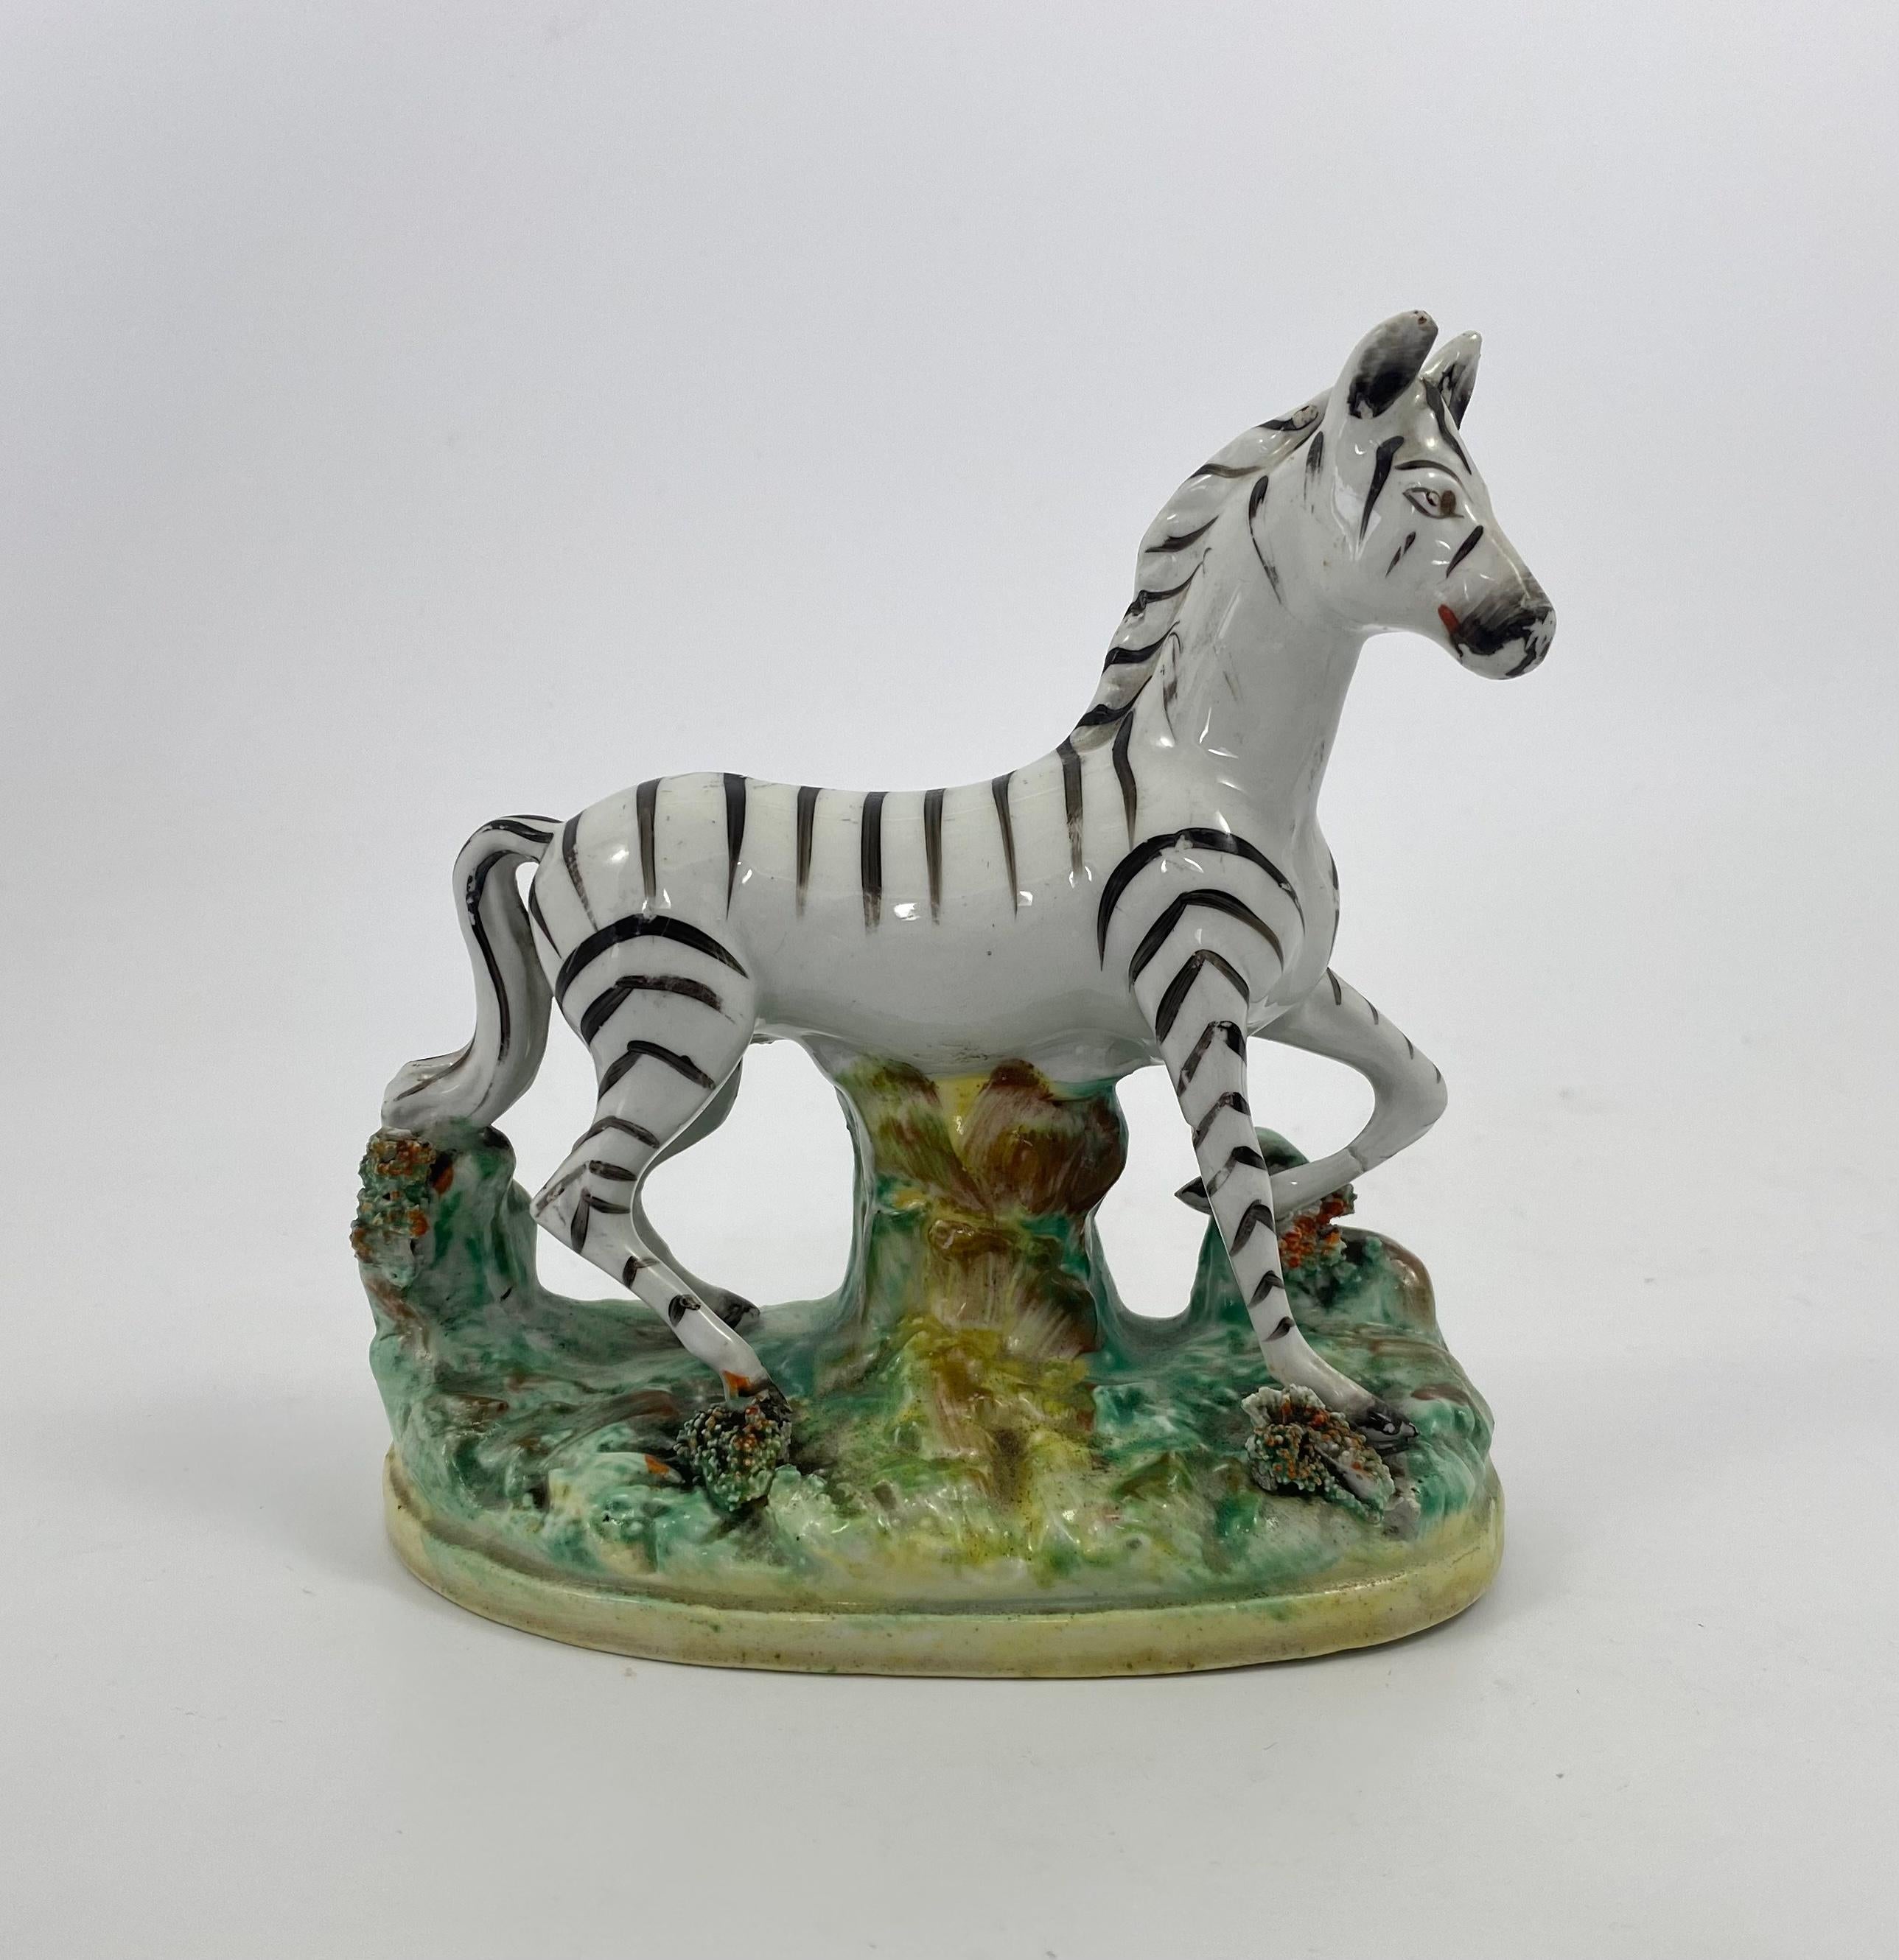 Pair Staffordshire pottery Zebra, Thomas Parr factory, c. 1860. Finely modelled, supported by tree trunks, upon oval grassy mound bases, painted in underglaze enamels, and encrusted with clumps of grass. Their stripes in black overglaze